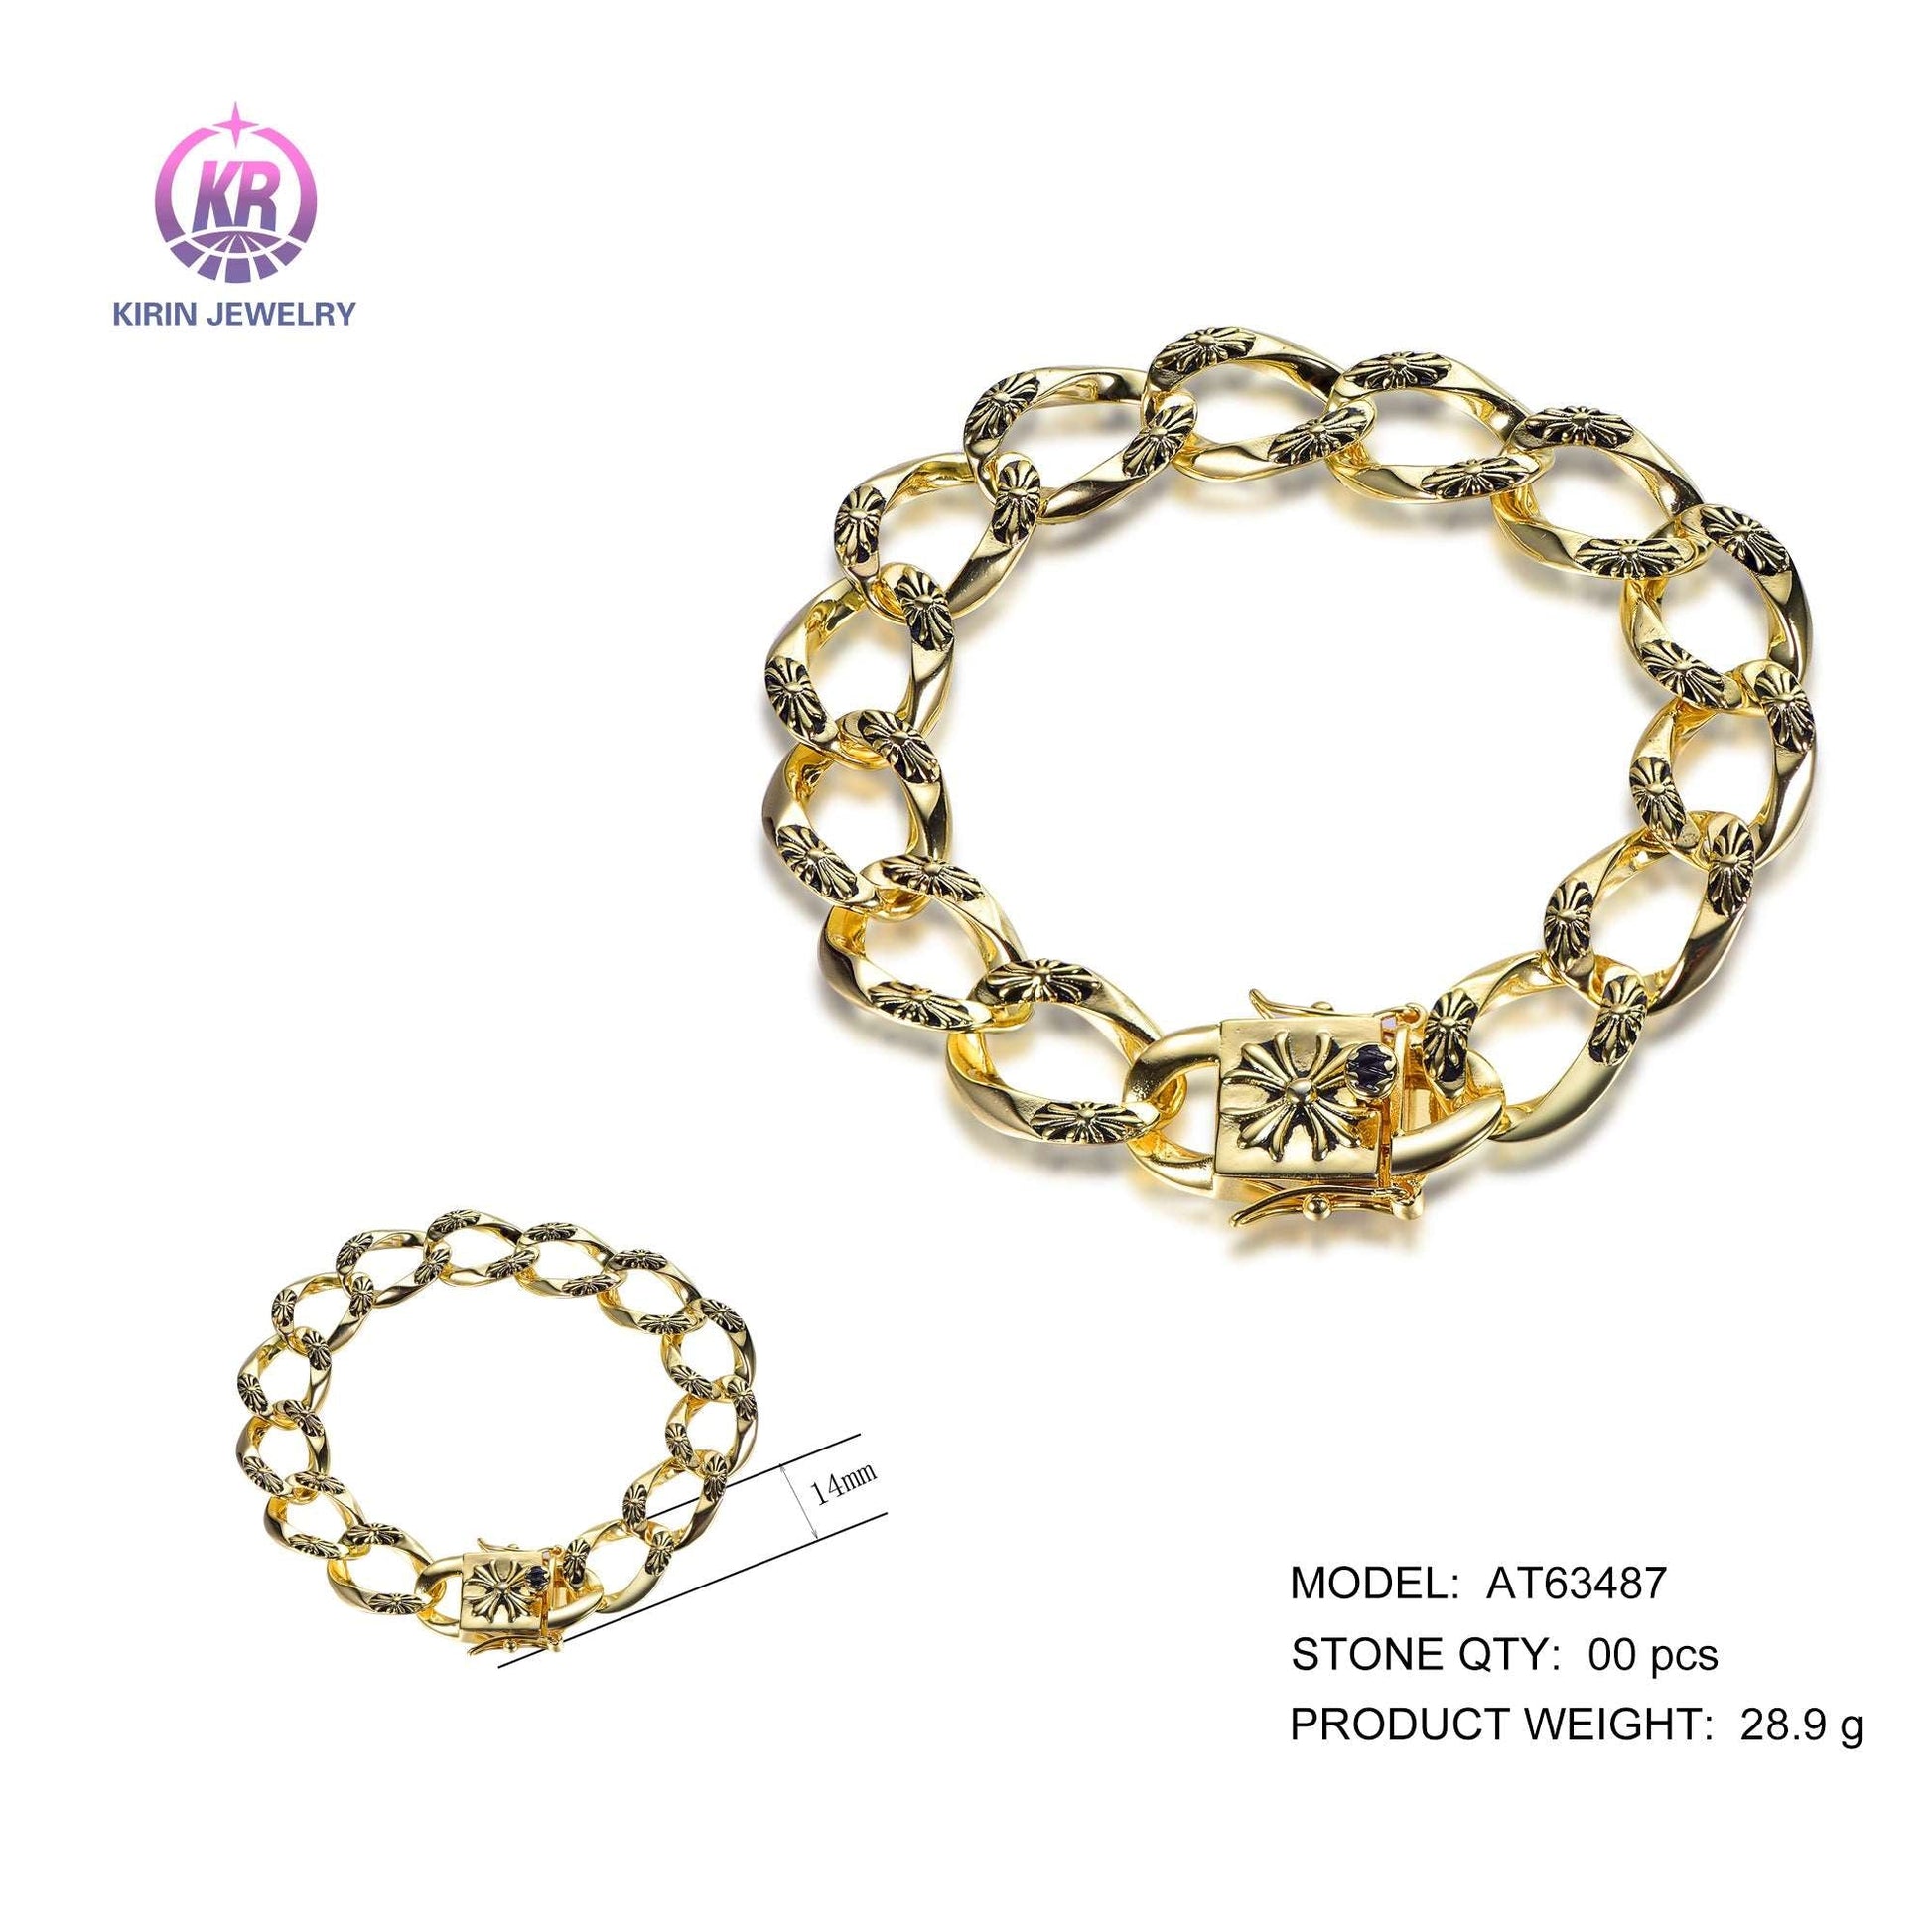 925 silver bracelet with 14K gold plating AT63487 Kirin Jewelry